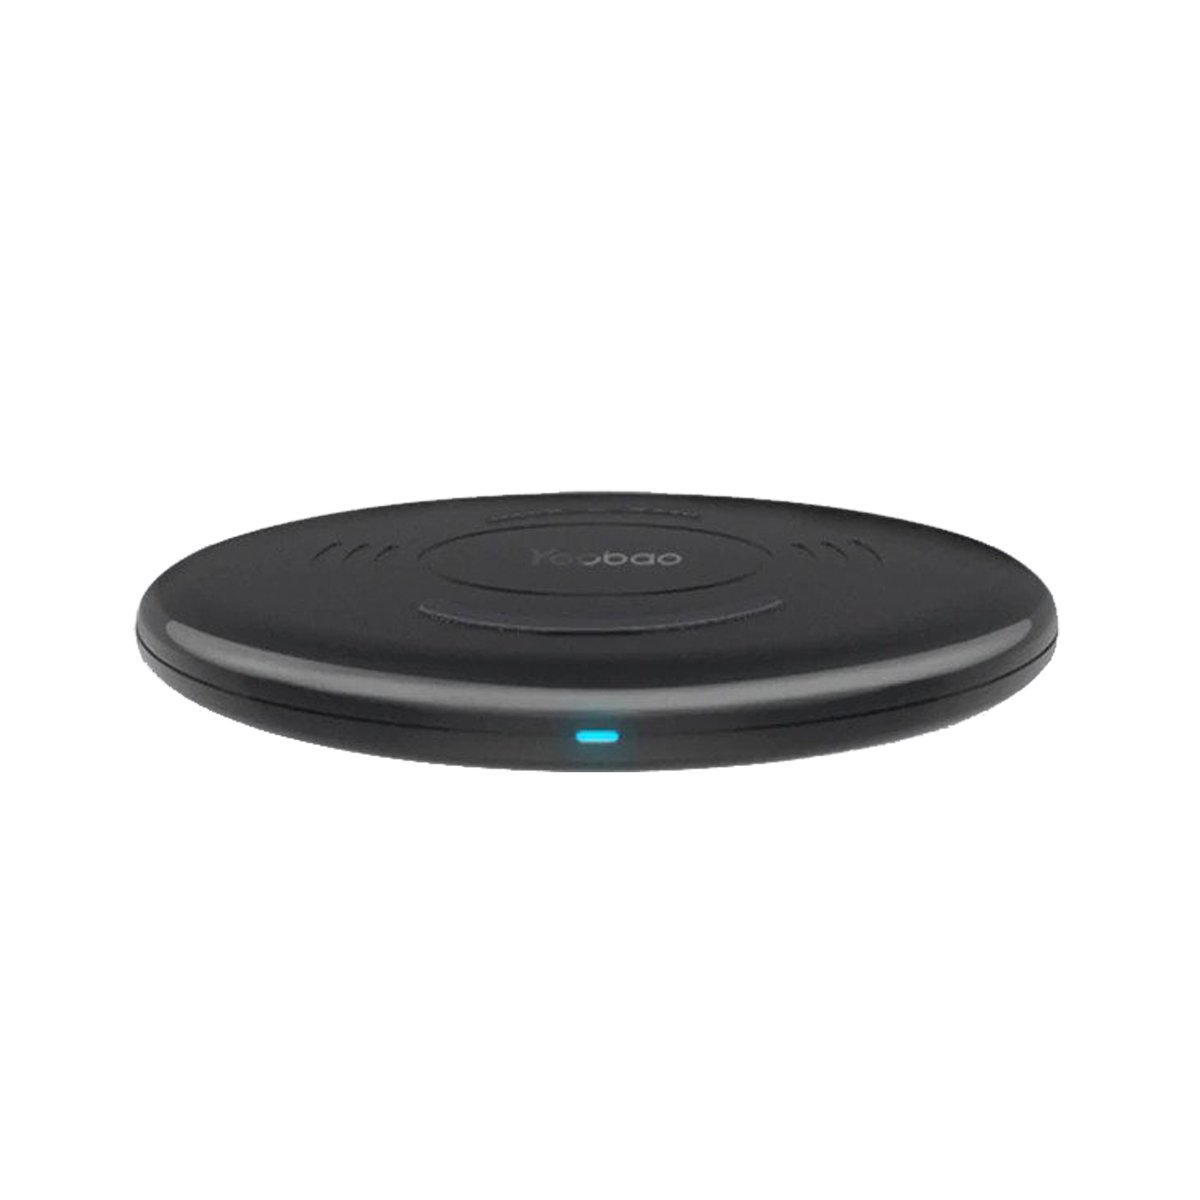 Yoobao Wireless Charger Pad D1B